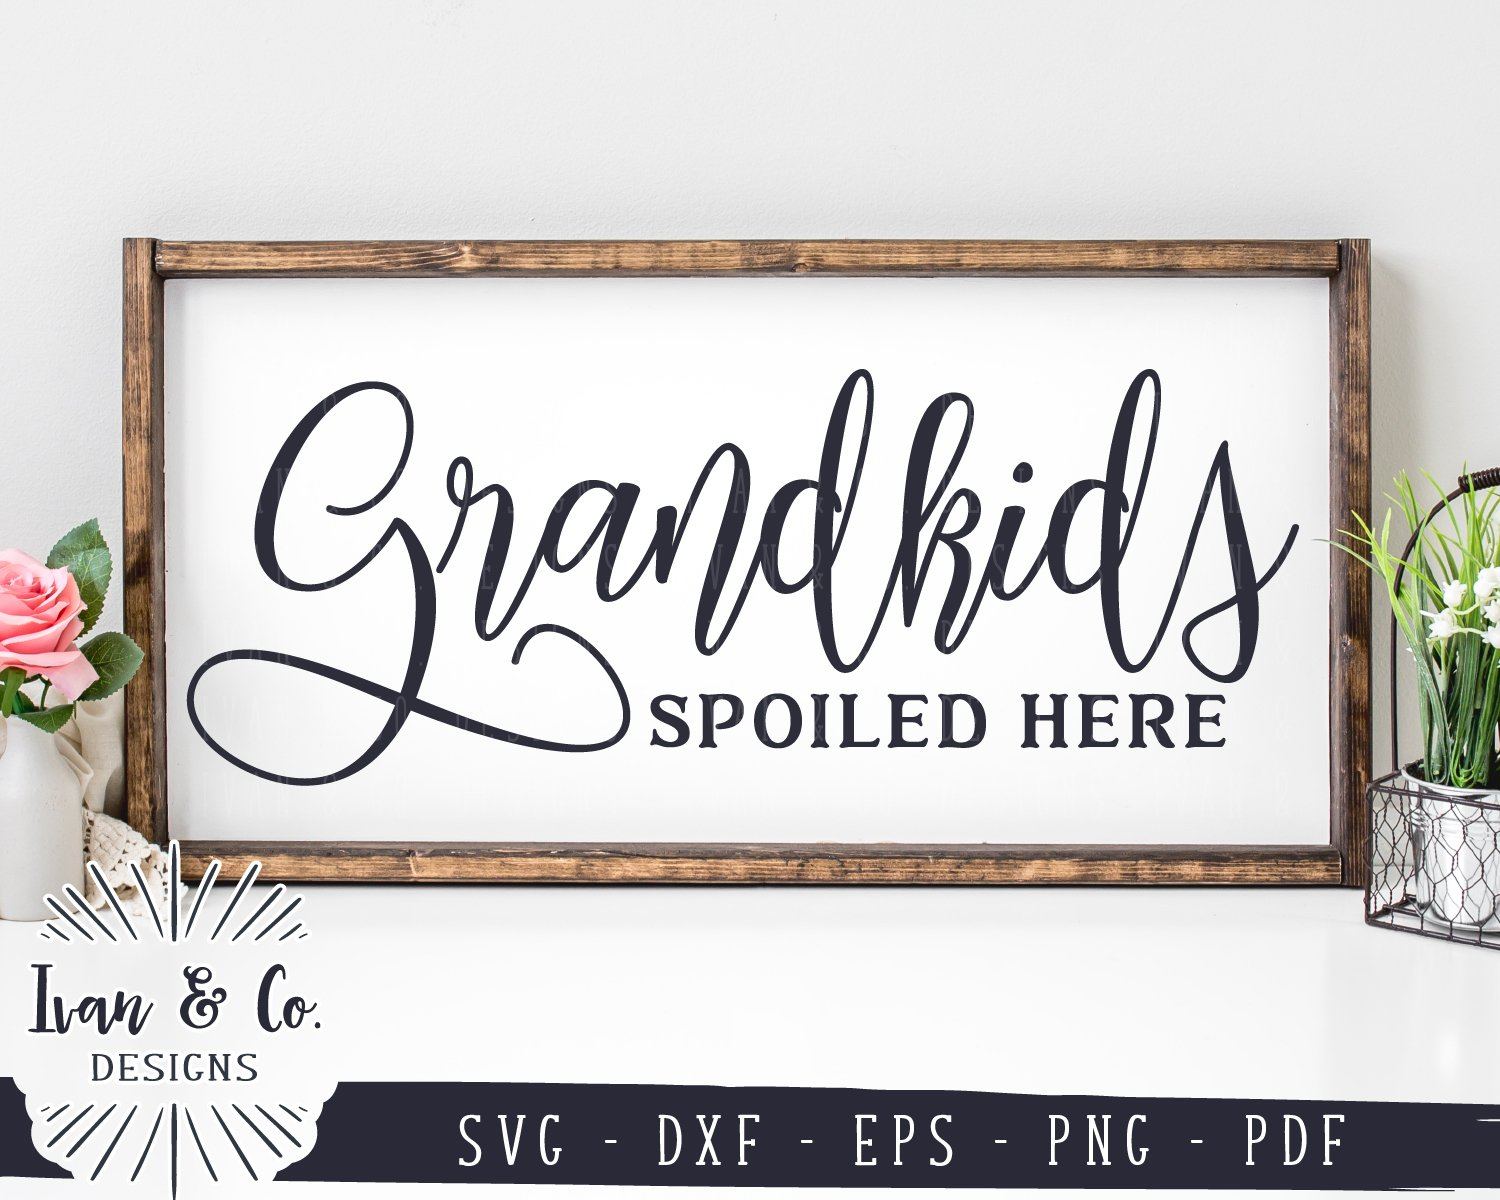 Download Grandkids Spoiled Here Svg Files Mother S Day Home Family Farmhouse Svg 985372125 So Fontsy